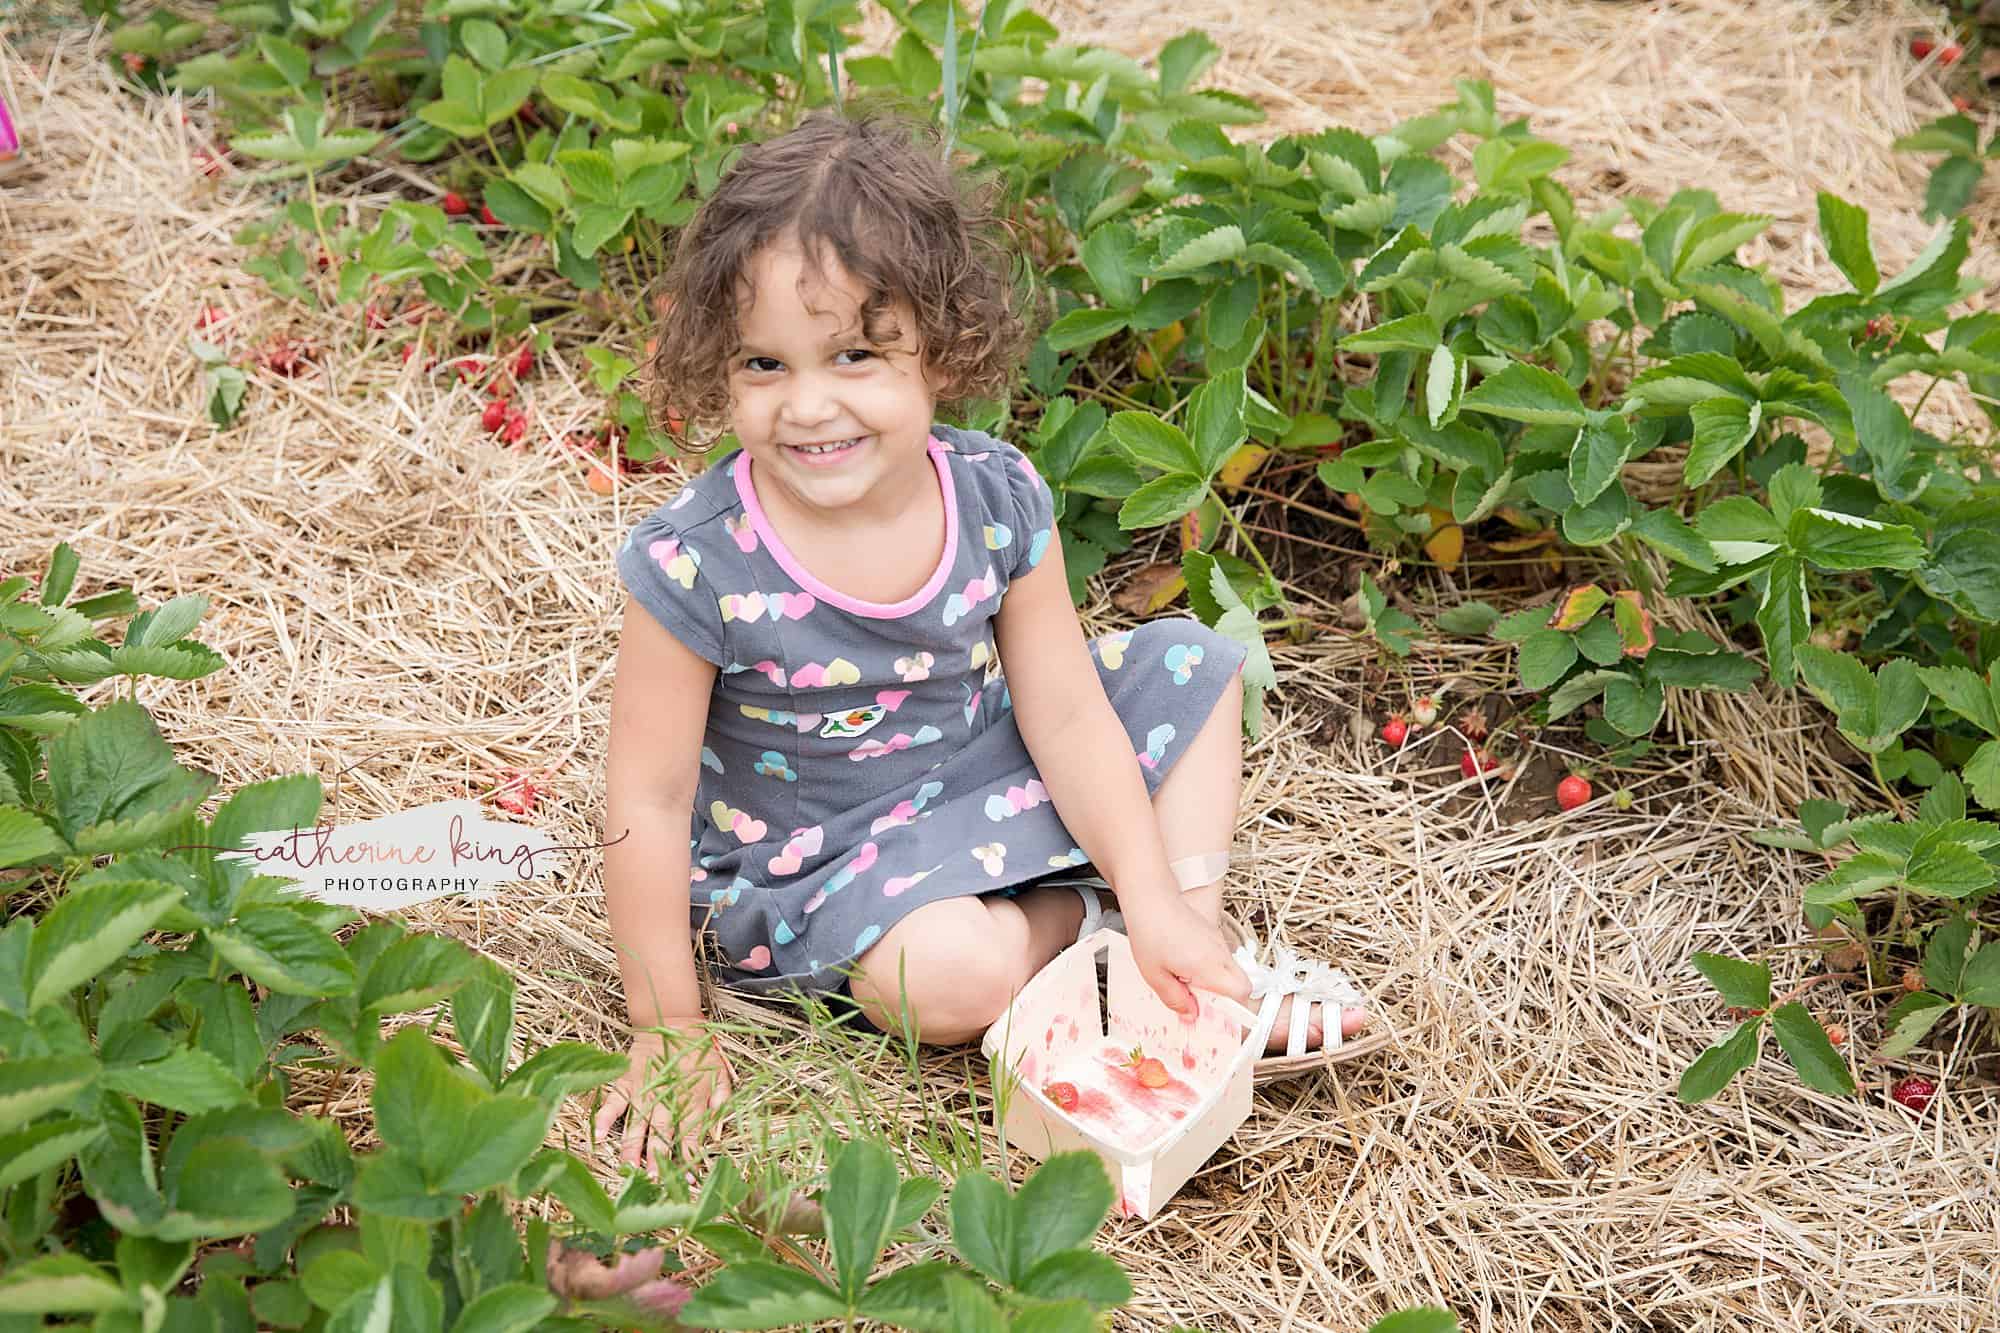 Fun things to do in CT this summer - Strawberry picking at Bishop's Orchard